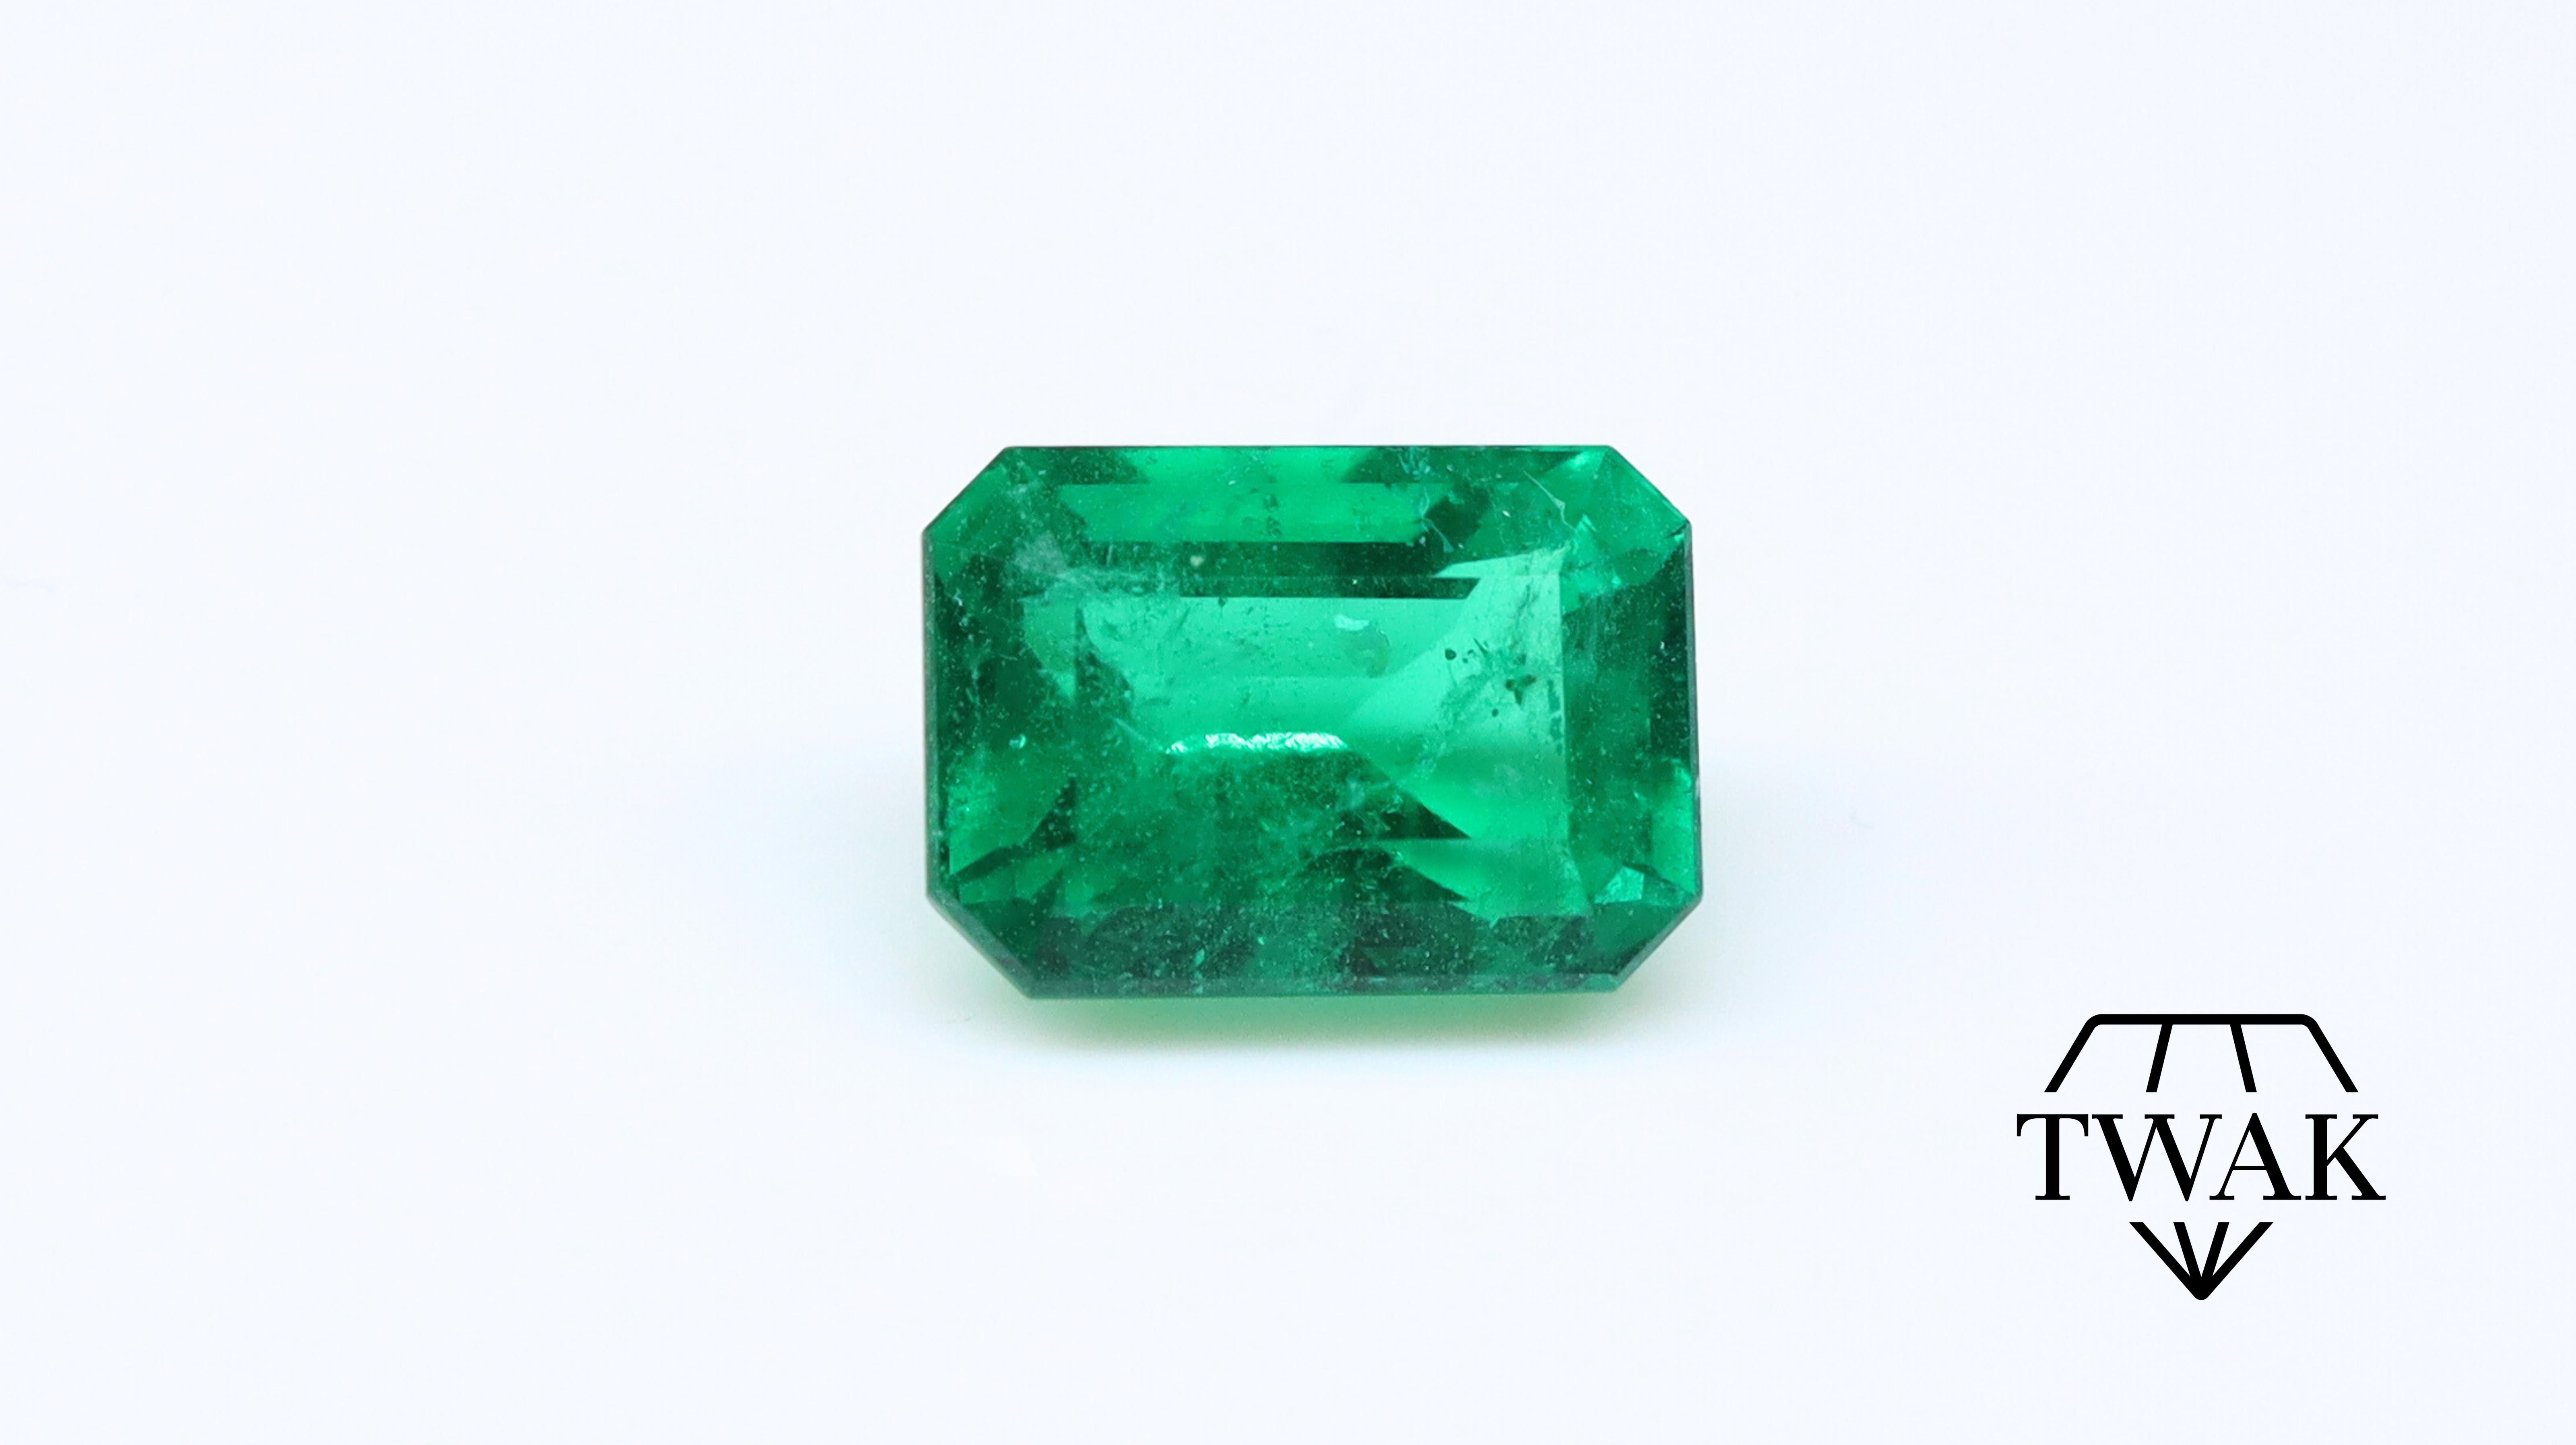 A beautiful Emerald with excellent color, crystal, and saturation.

Details and description:
Dimensions: 7.01 x 5.00 x 3.90mm
Weight: 1.01ct
Color: Intense Green 
Treatment: Oil

Emeralds are naturally porous and inclusive stones, with surface